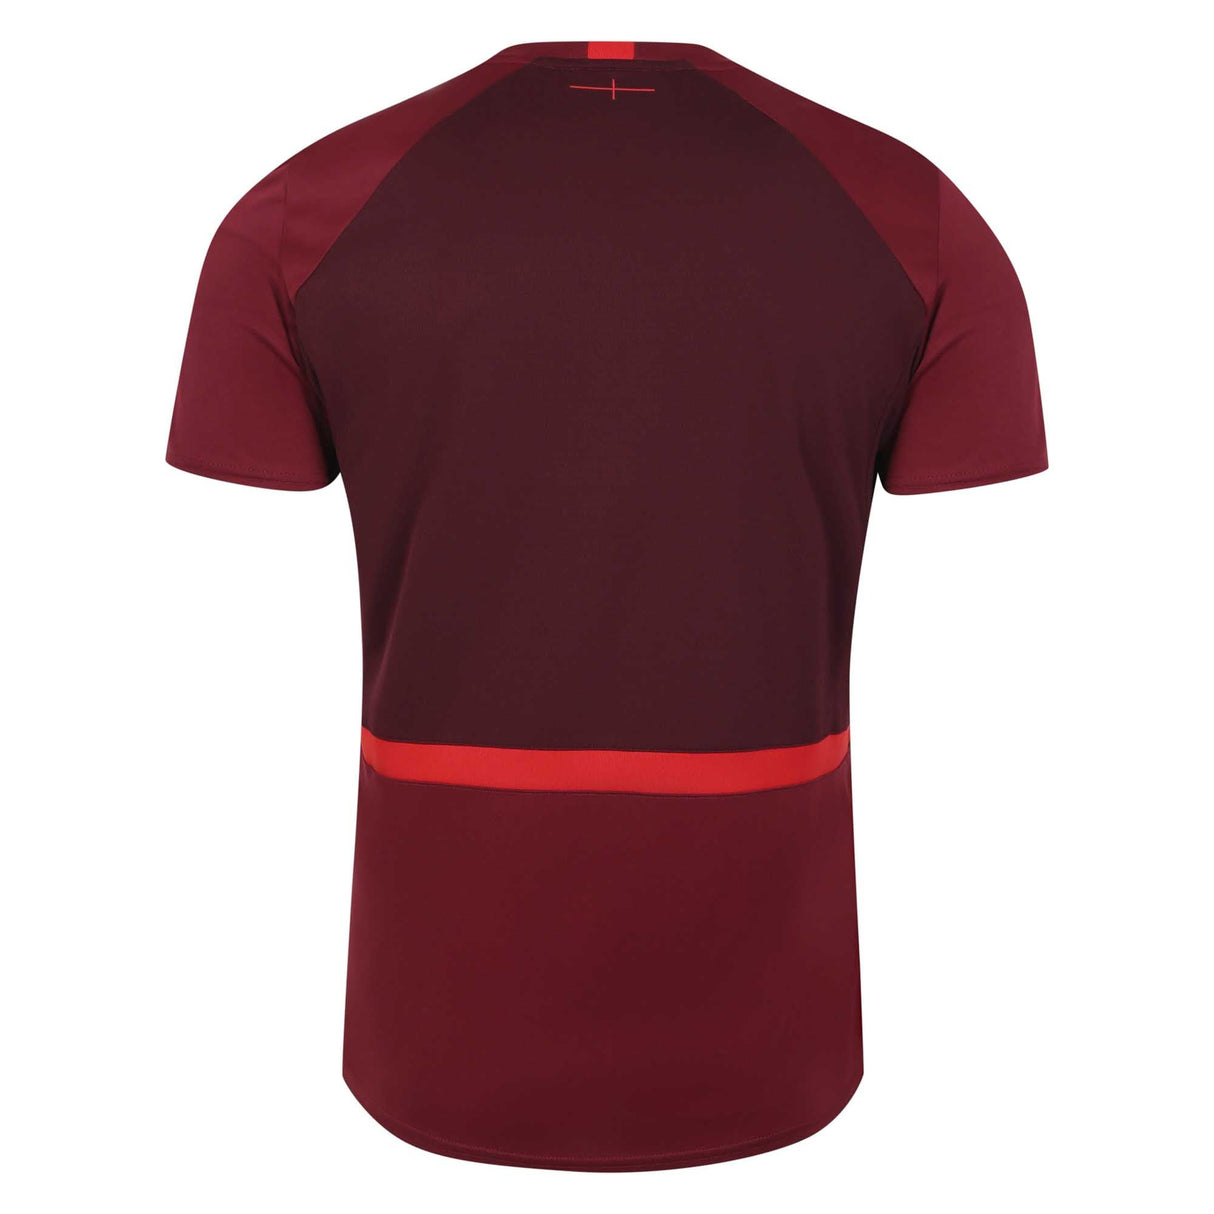 Umbro Men's England Rugby Gym T-Shirt 23/24 - Red |T-Shirt | Umbro RFU | Absolute Rugby